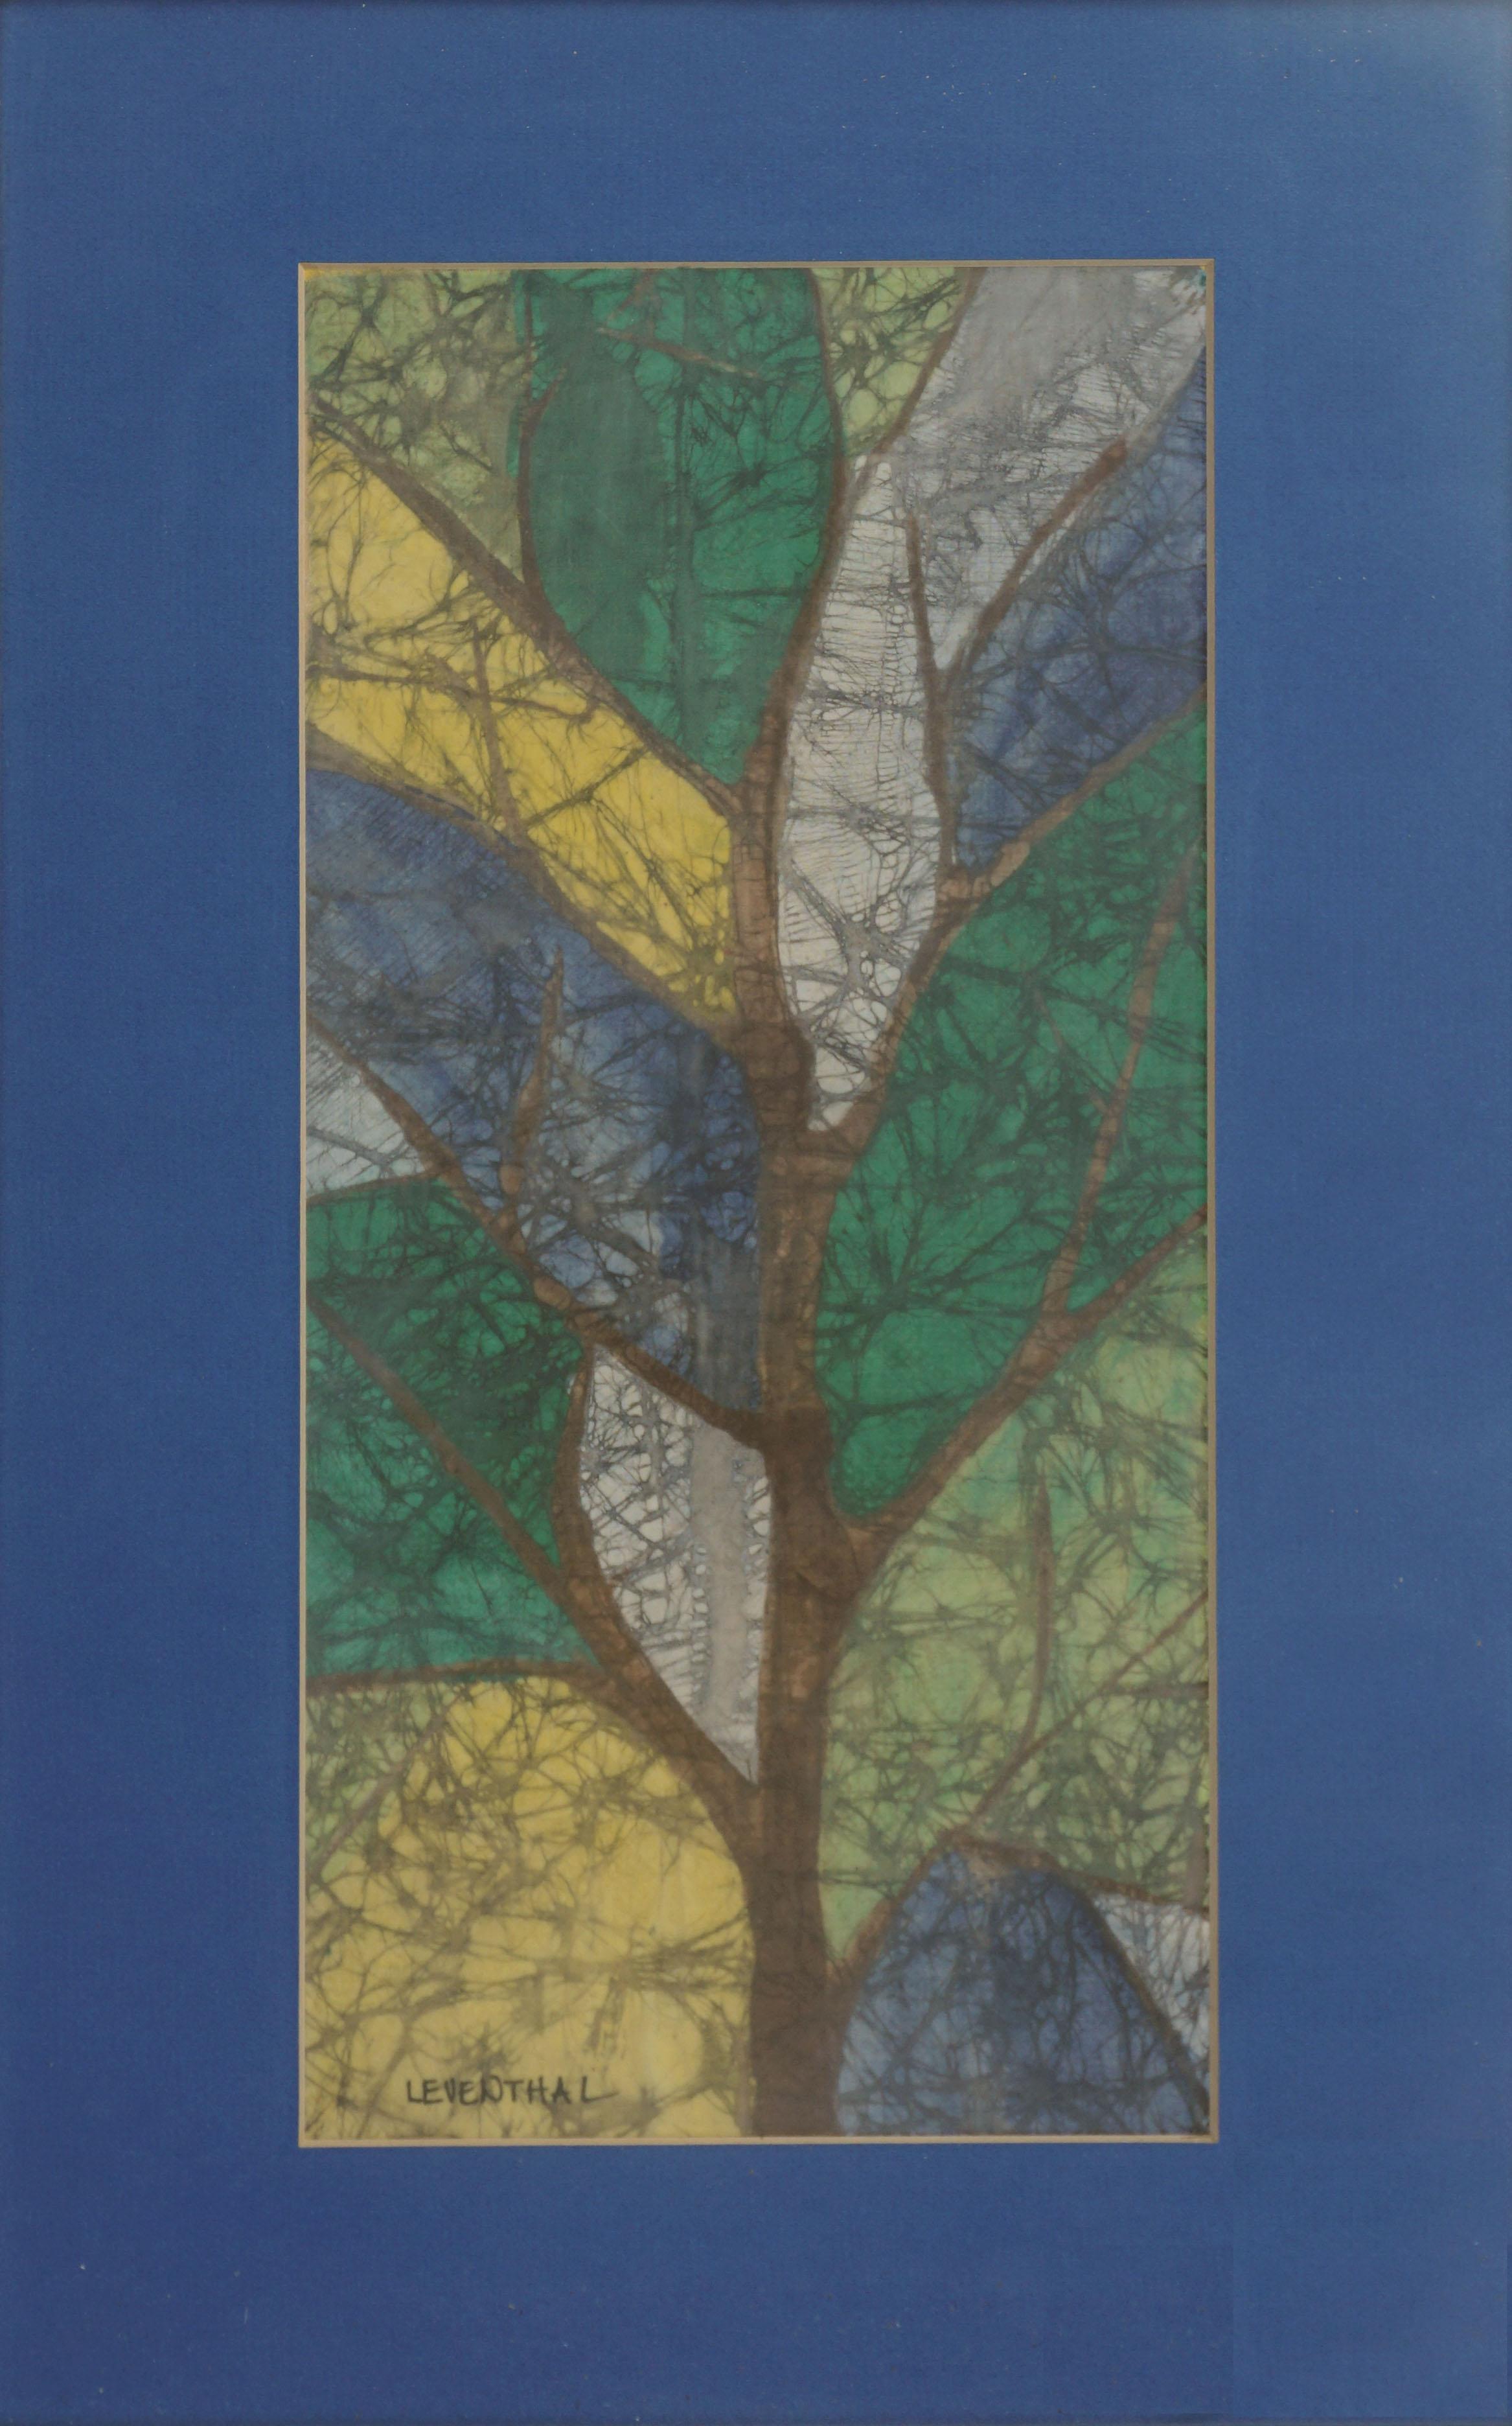 Rubber Tree Abstract Batik Fabric Art with Yellow, Green, & Blue - Painting by Leventhal